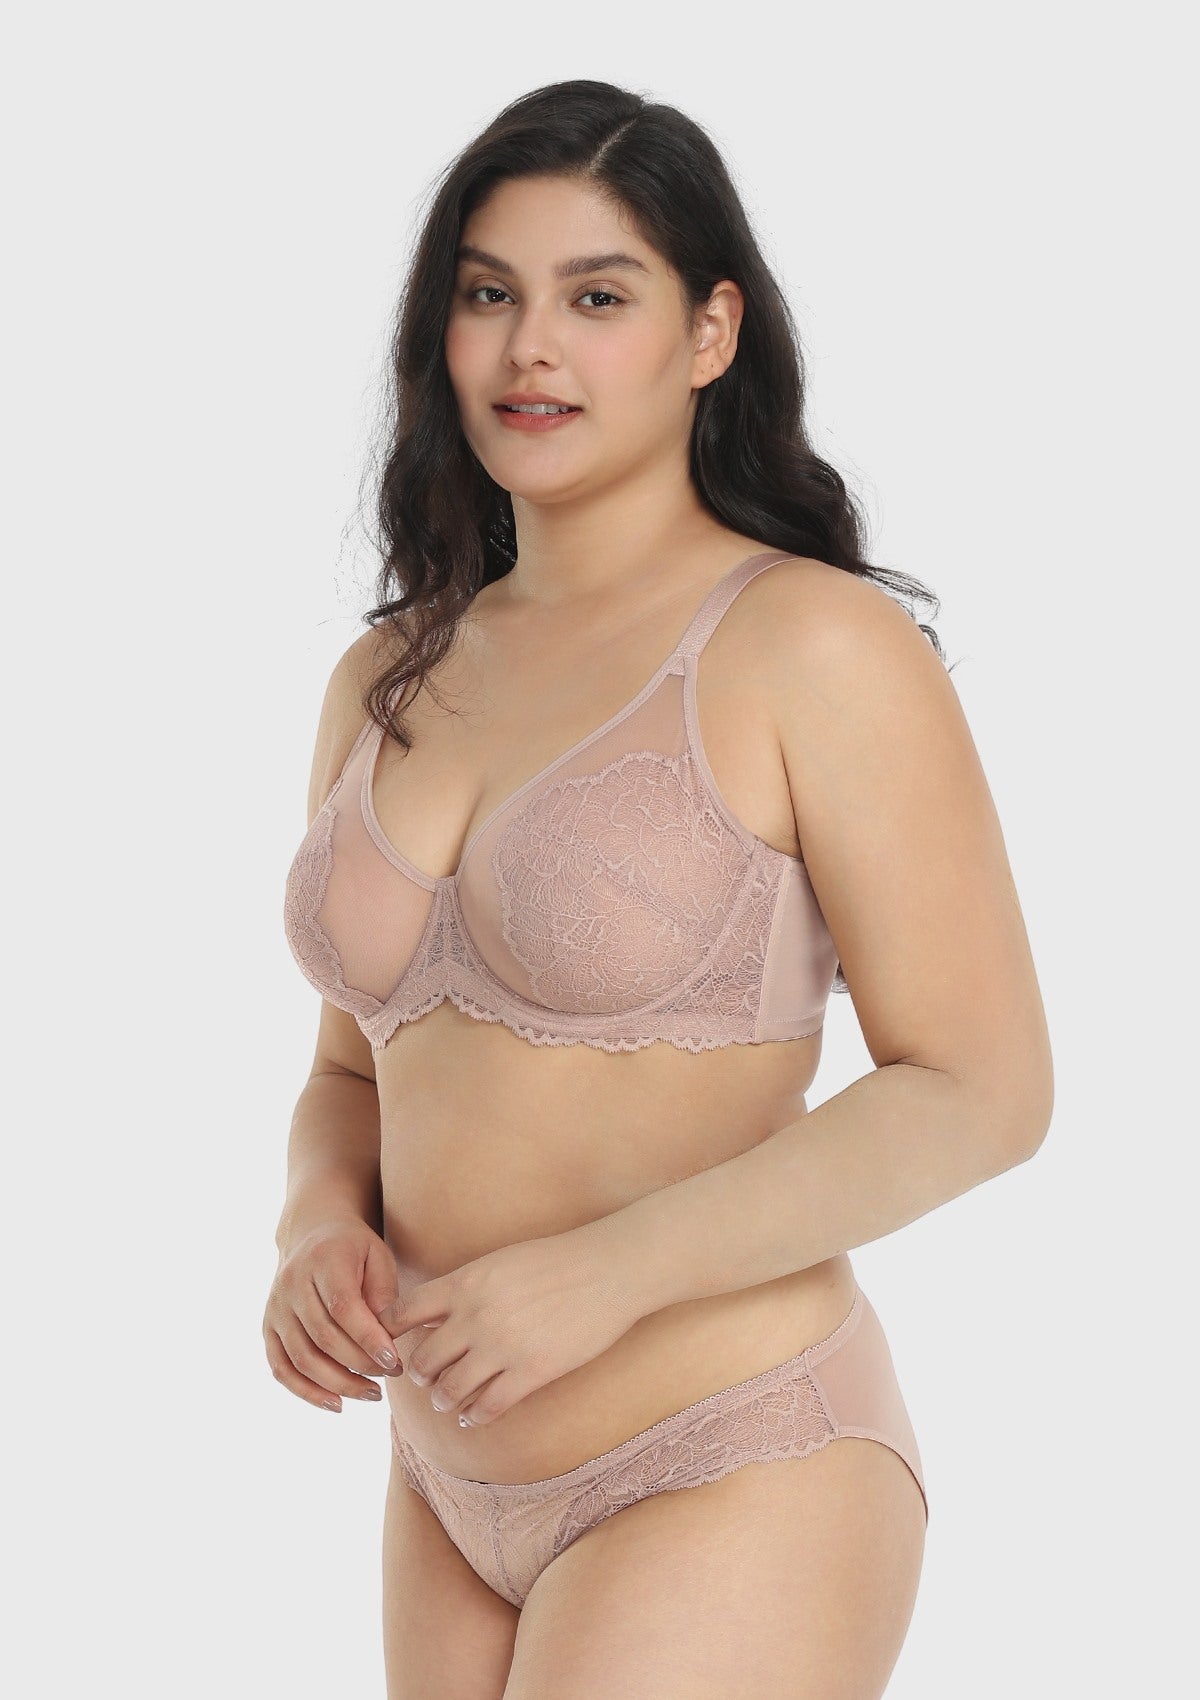 HSIA Blossom Plus Size Lace Bra - Wired, Unpadded, See-Through - Dark Pink / 36 / DD/E